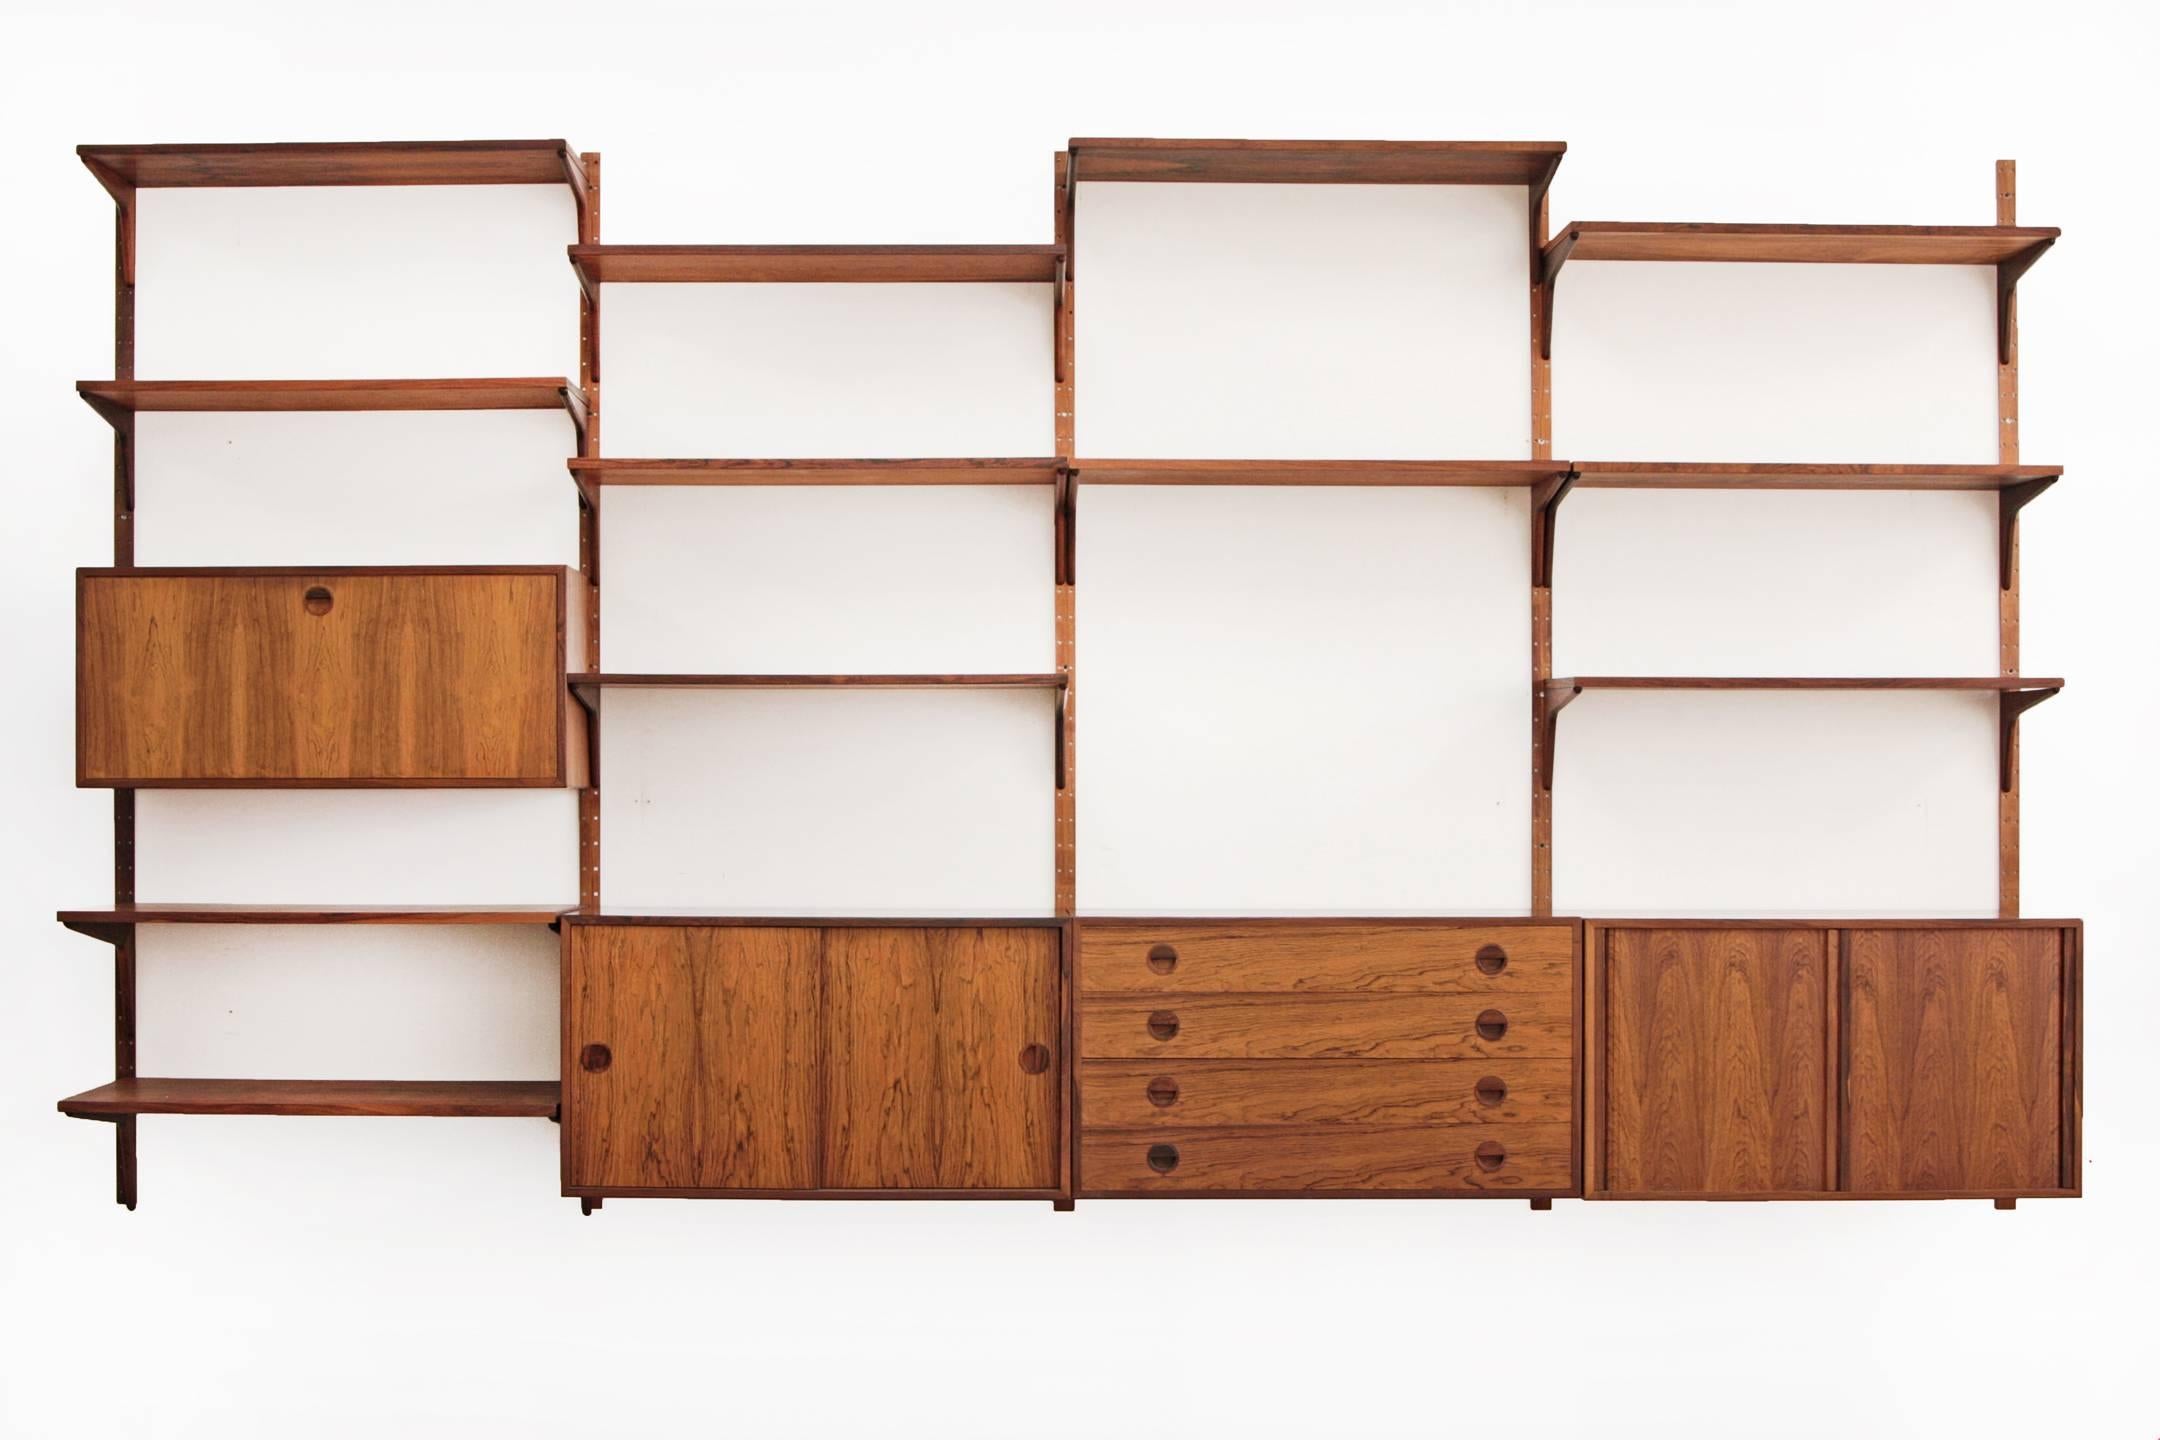 Rosewood Danish modern modular wall unit by Hansen and Guldborg. Five rails suspend a four bay unit consisting of four cabinets and 12 shelves. This unit is completely modular and can be configured however suits your needs.